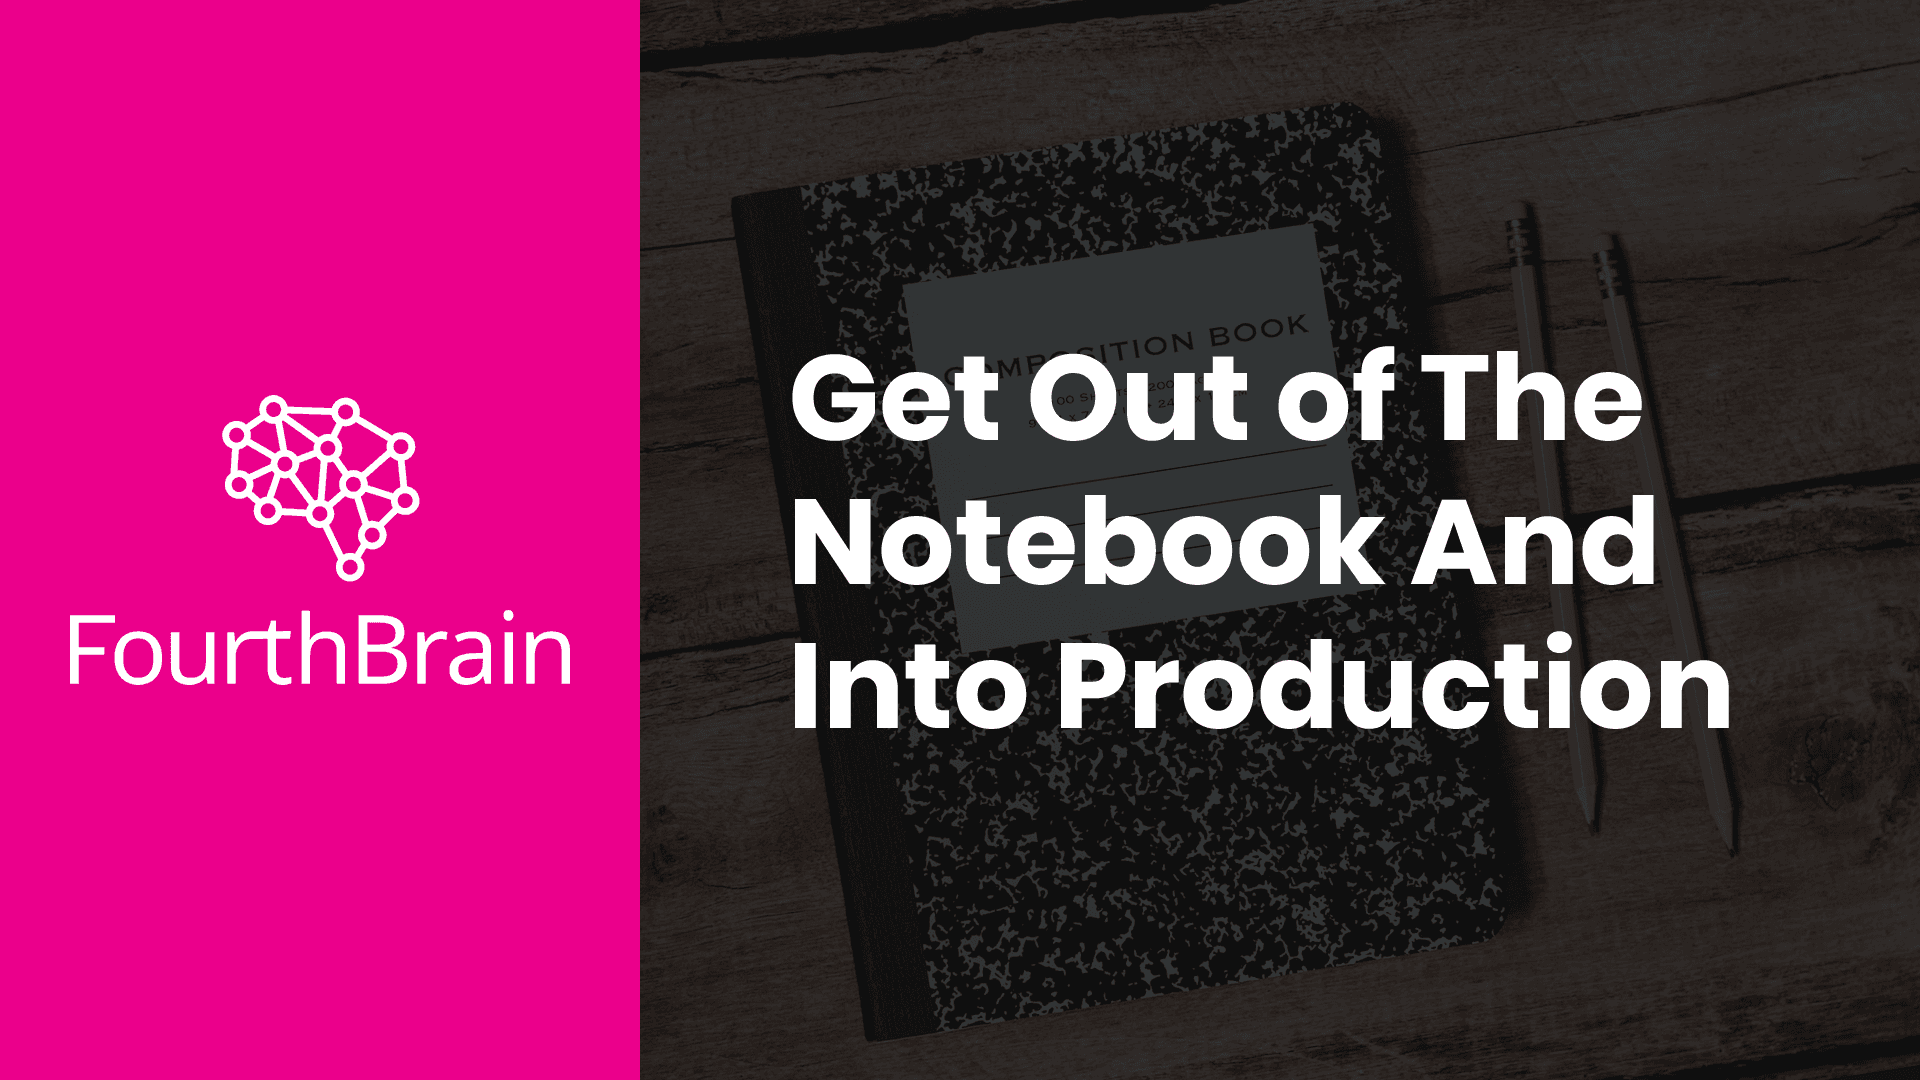 Product Webinar Replay: Get Out of The Notebook And Into Production - FourthBrain image